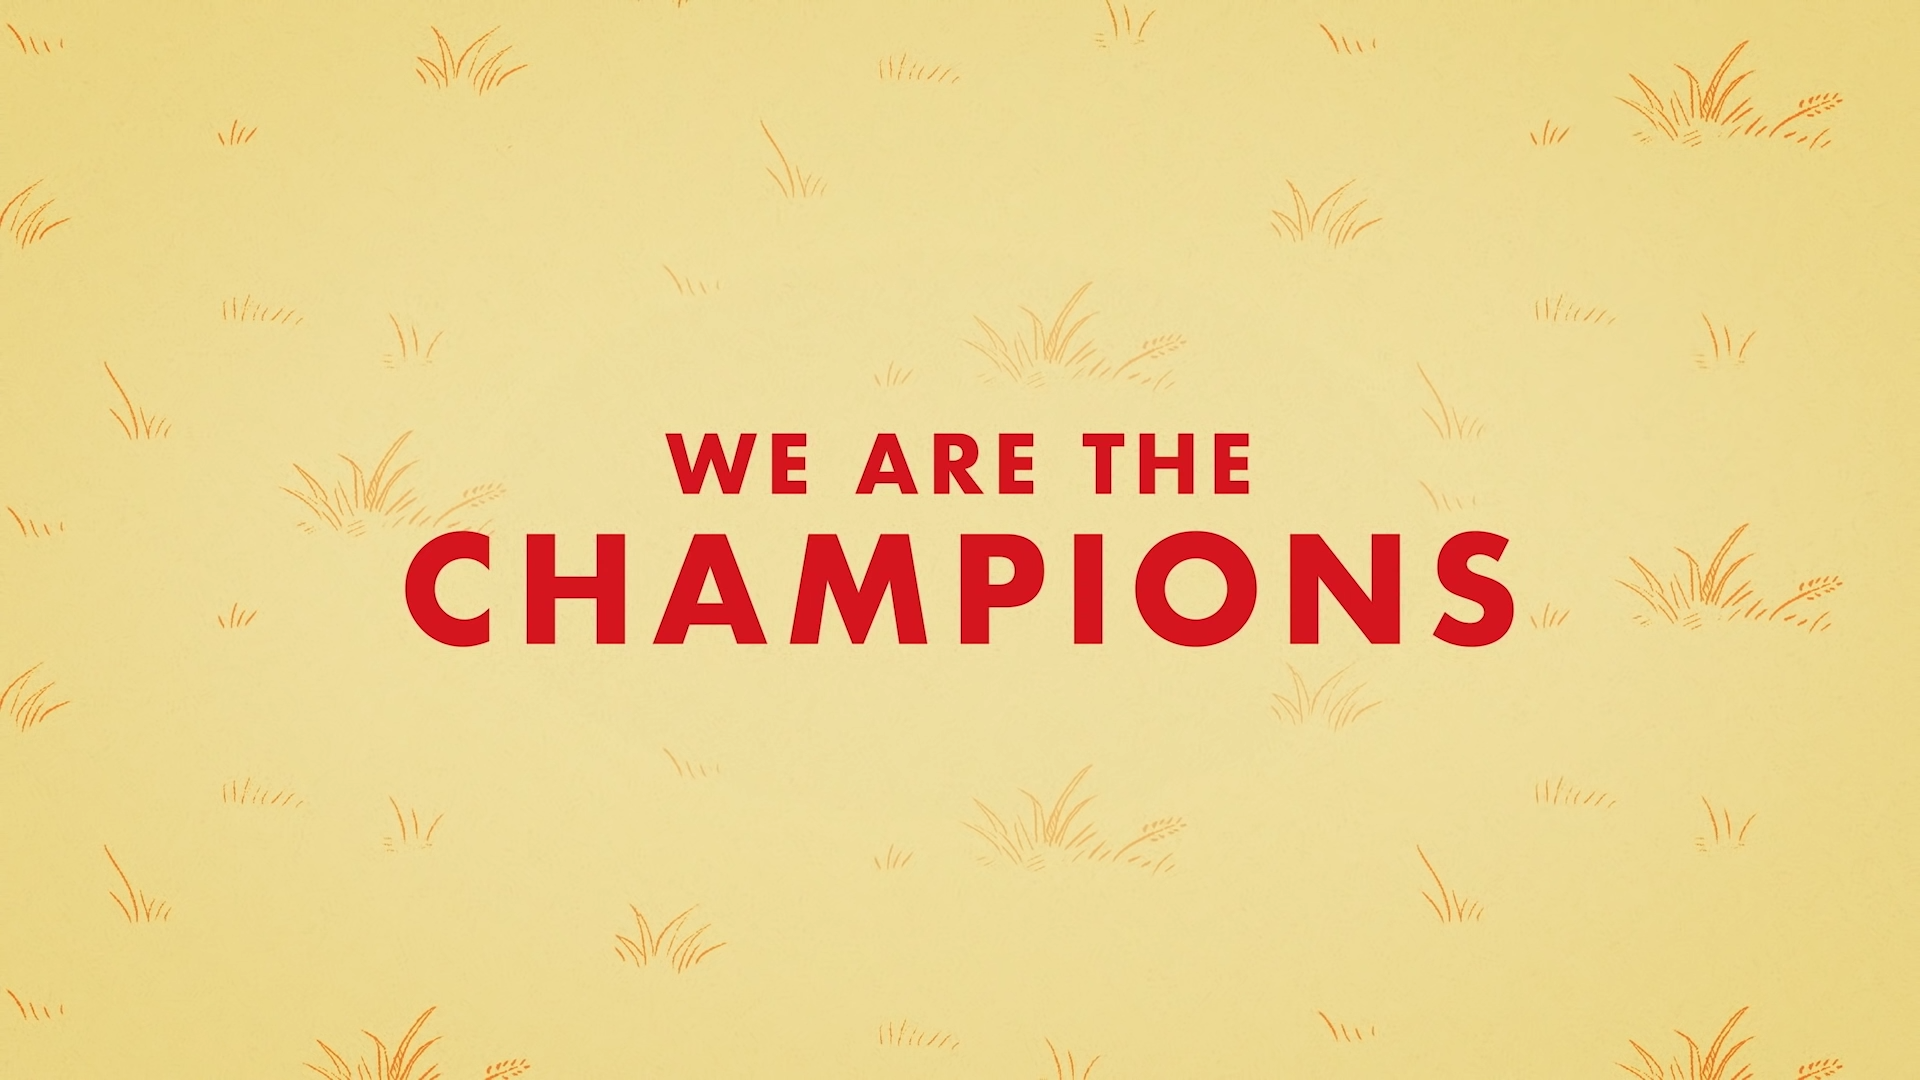 Netflix We Are The Champions Trailer, Netflix Sports Series, Netflix Documentary Series, Coming to Netflix in November 2020